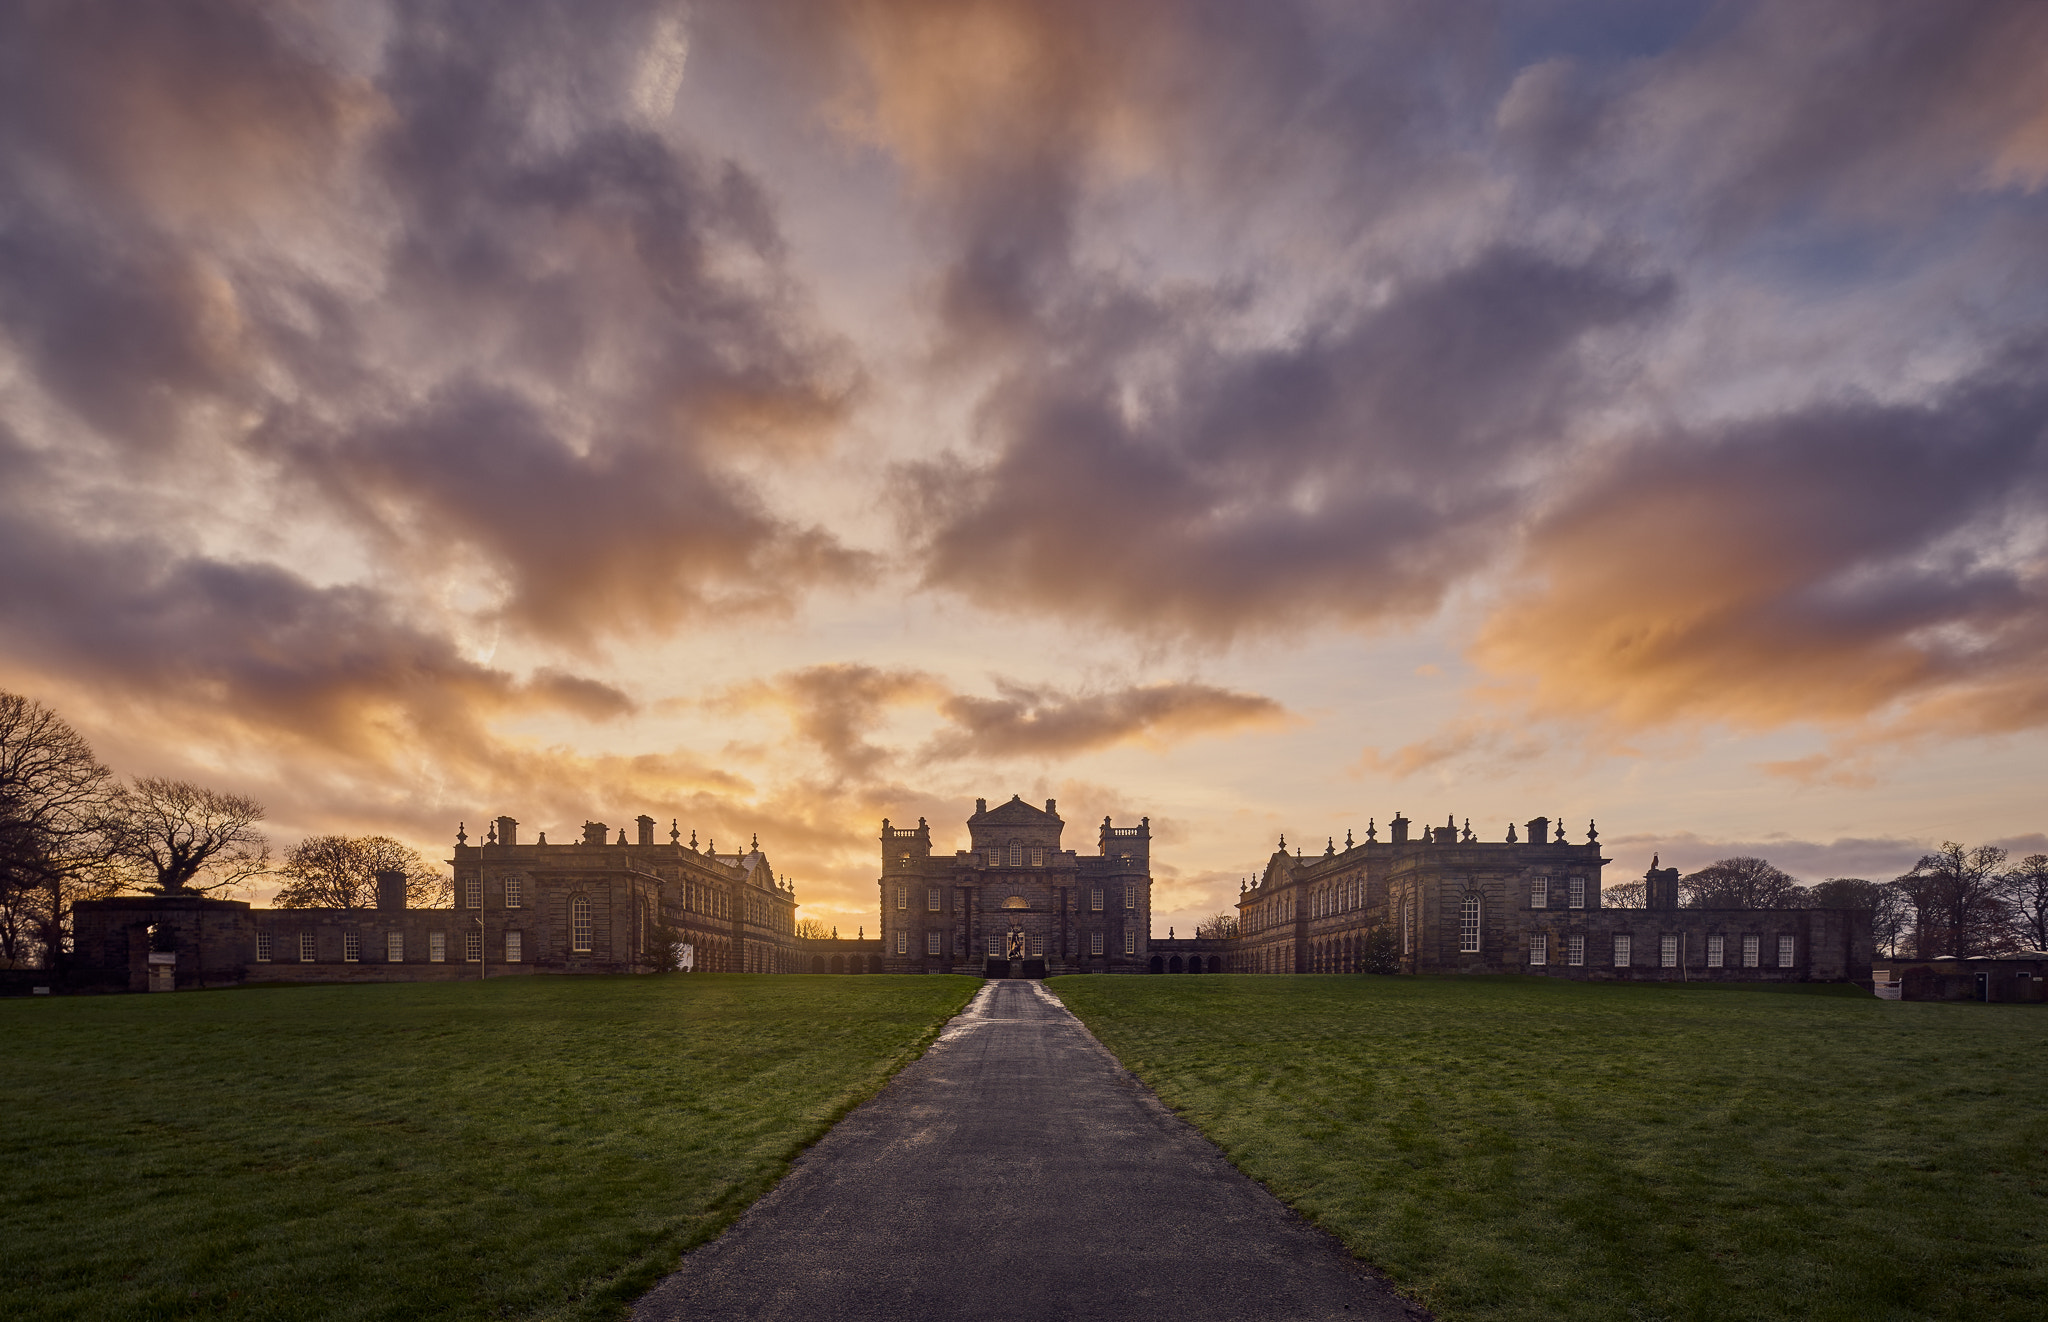 Sony a7R + 17mm F4 G sample photo. Sunrise over seaton delaval hall photography